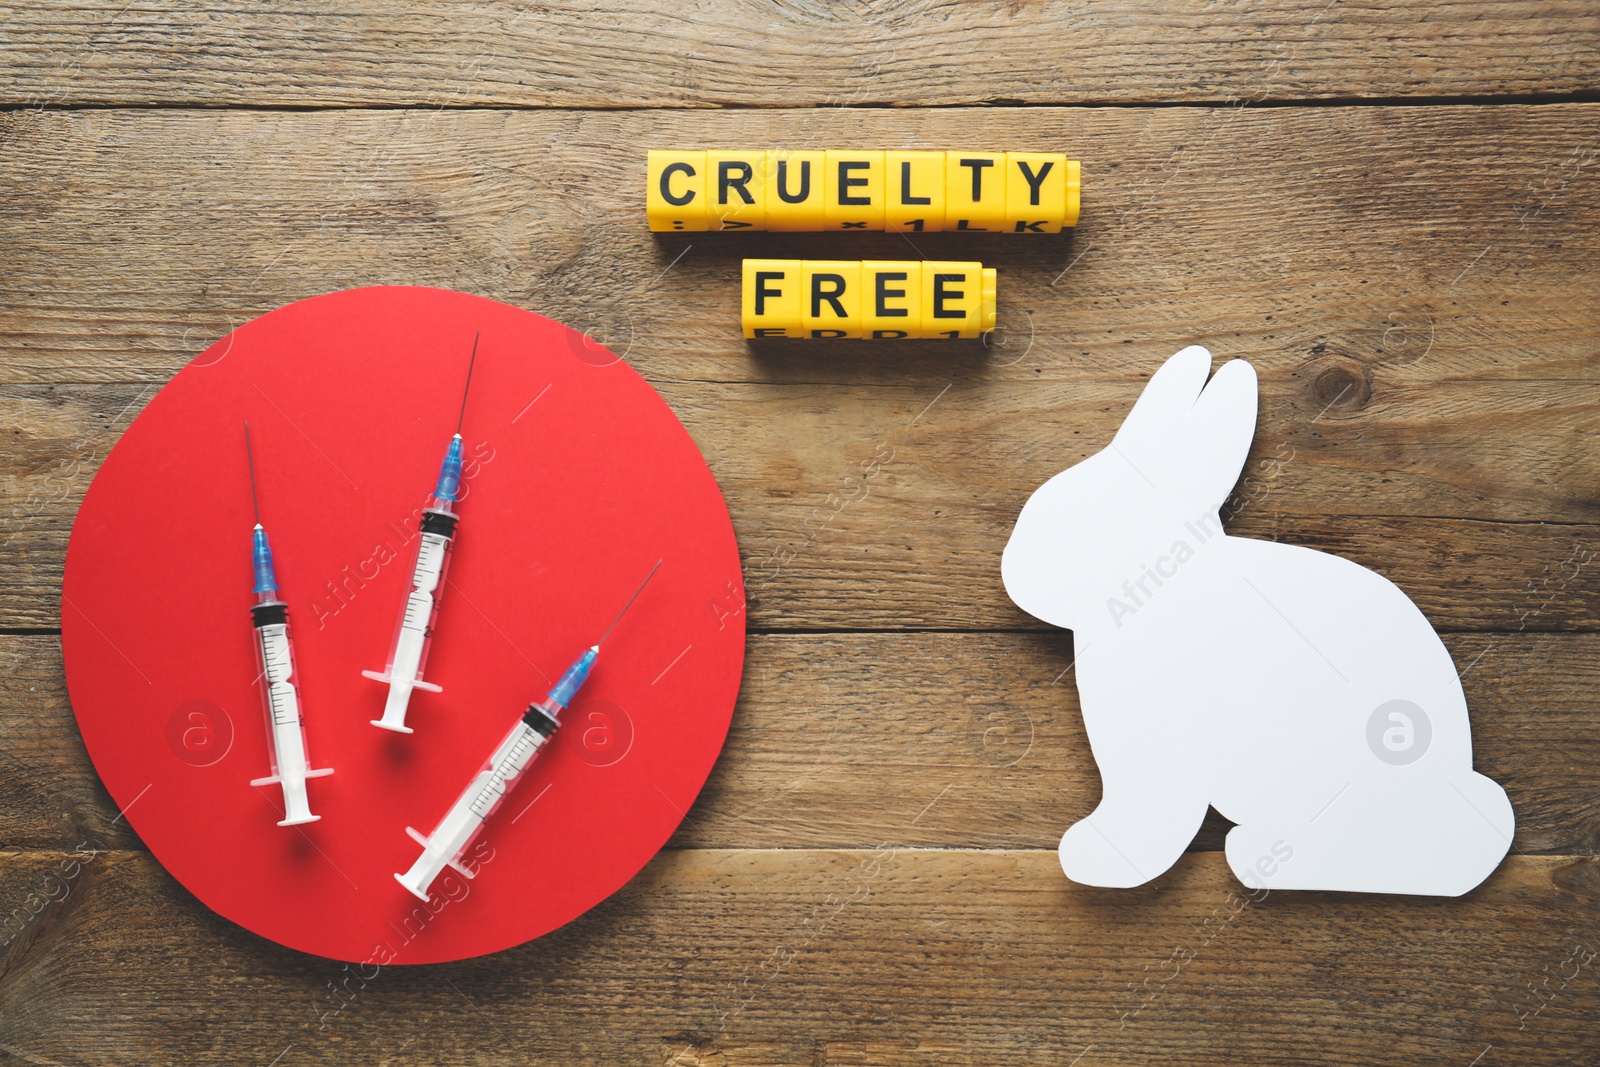 Photo of Cubes with text Cruelty Free, syringes and figure of rabbit on wooden table, flat lay. Stop animal tests